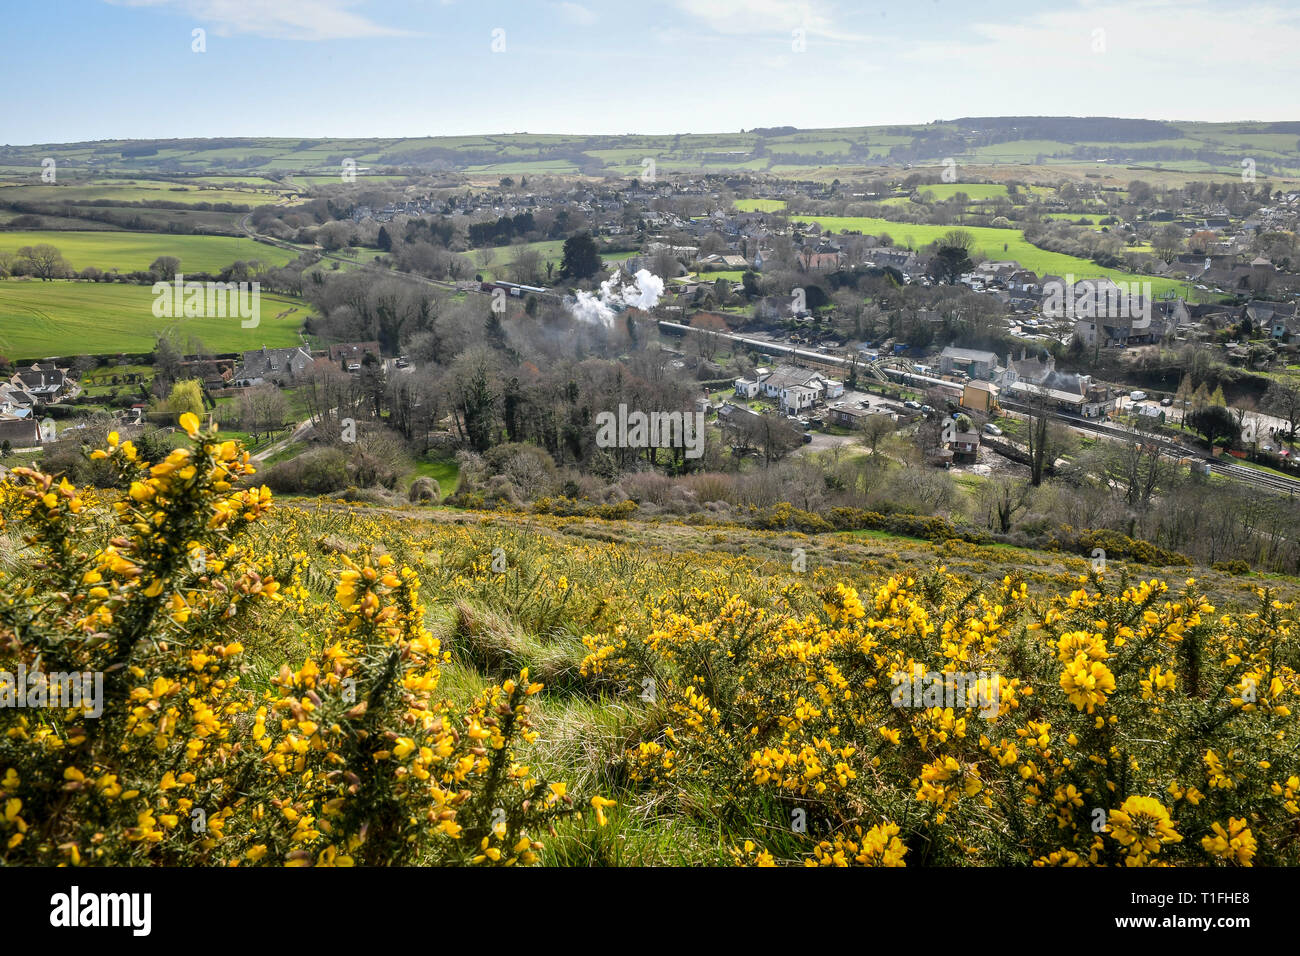 Bright yellow gorse flowers fill a hillside as a steam train passes through Corfe Castle train station in bright sunshine, as temperatures are set to increase across the UK this week. Stock Photo